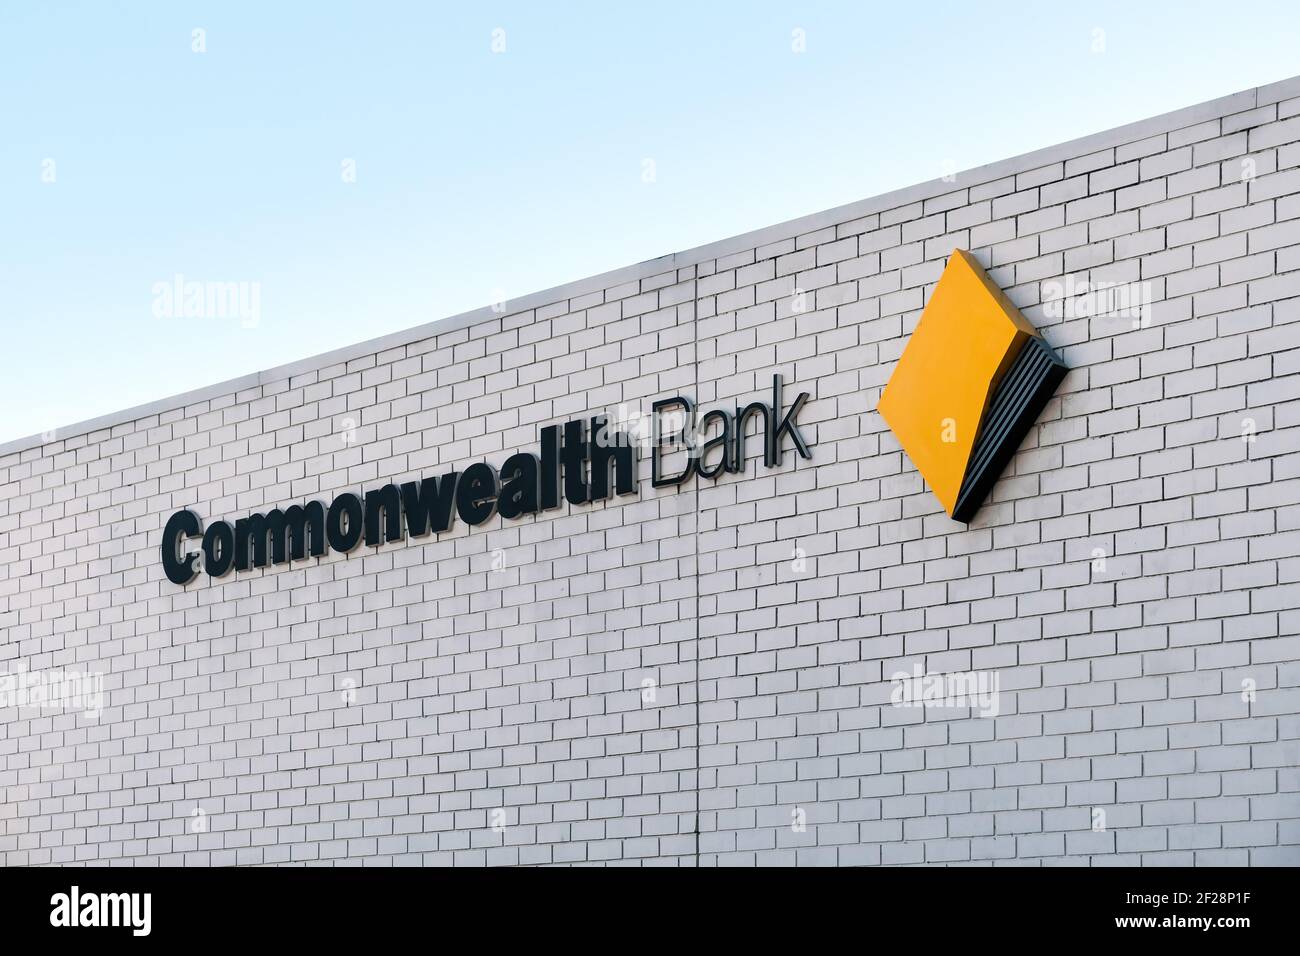 Adelaide, South Australia - August 17, 2019: Commonwealth Bank branch logo sign above the entrance near Unley shopping center Stock Photo